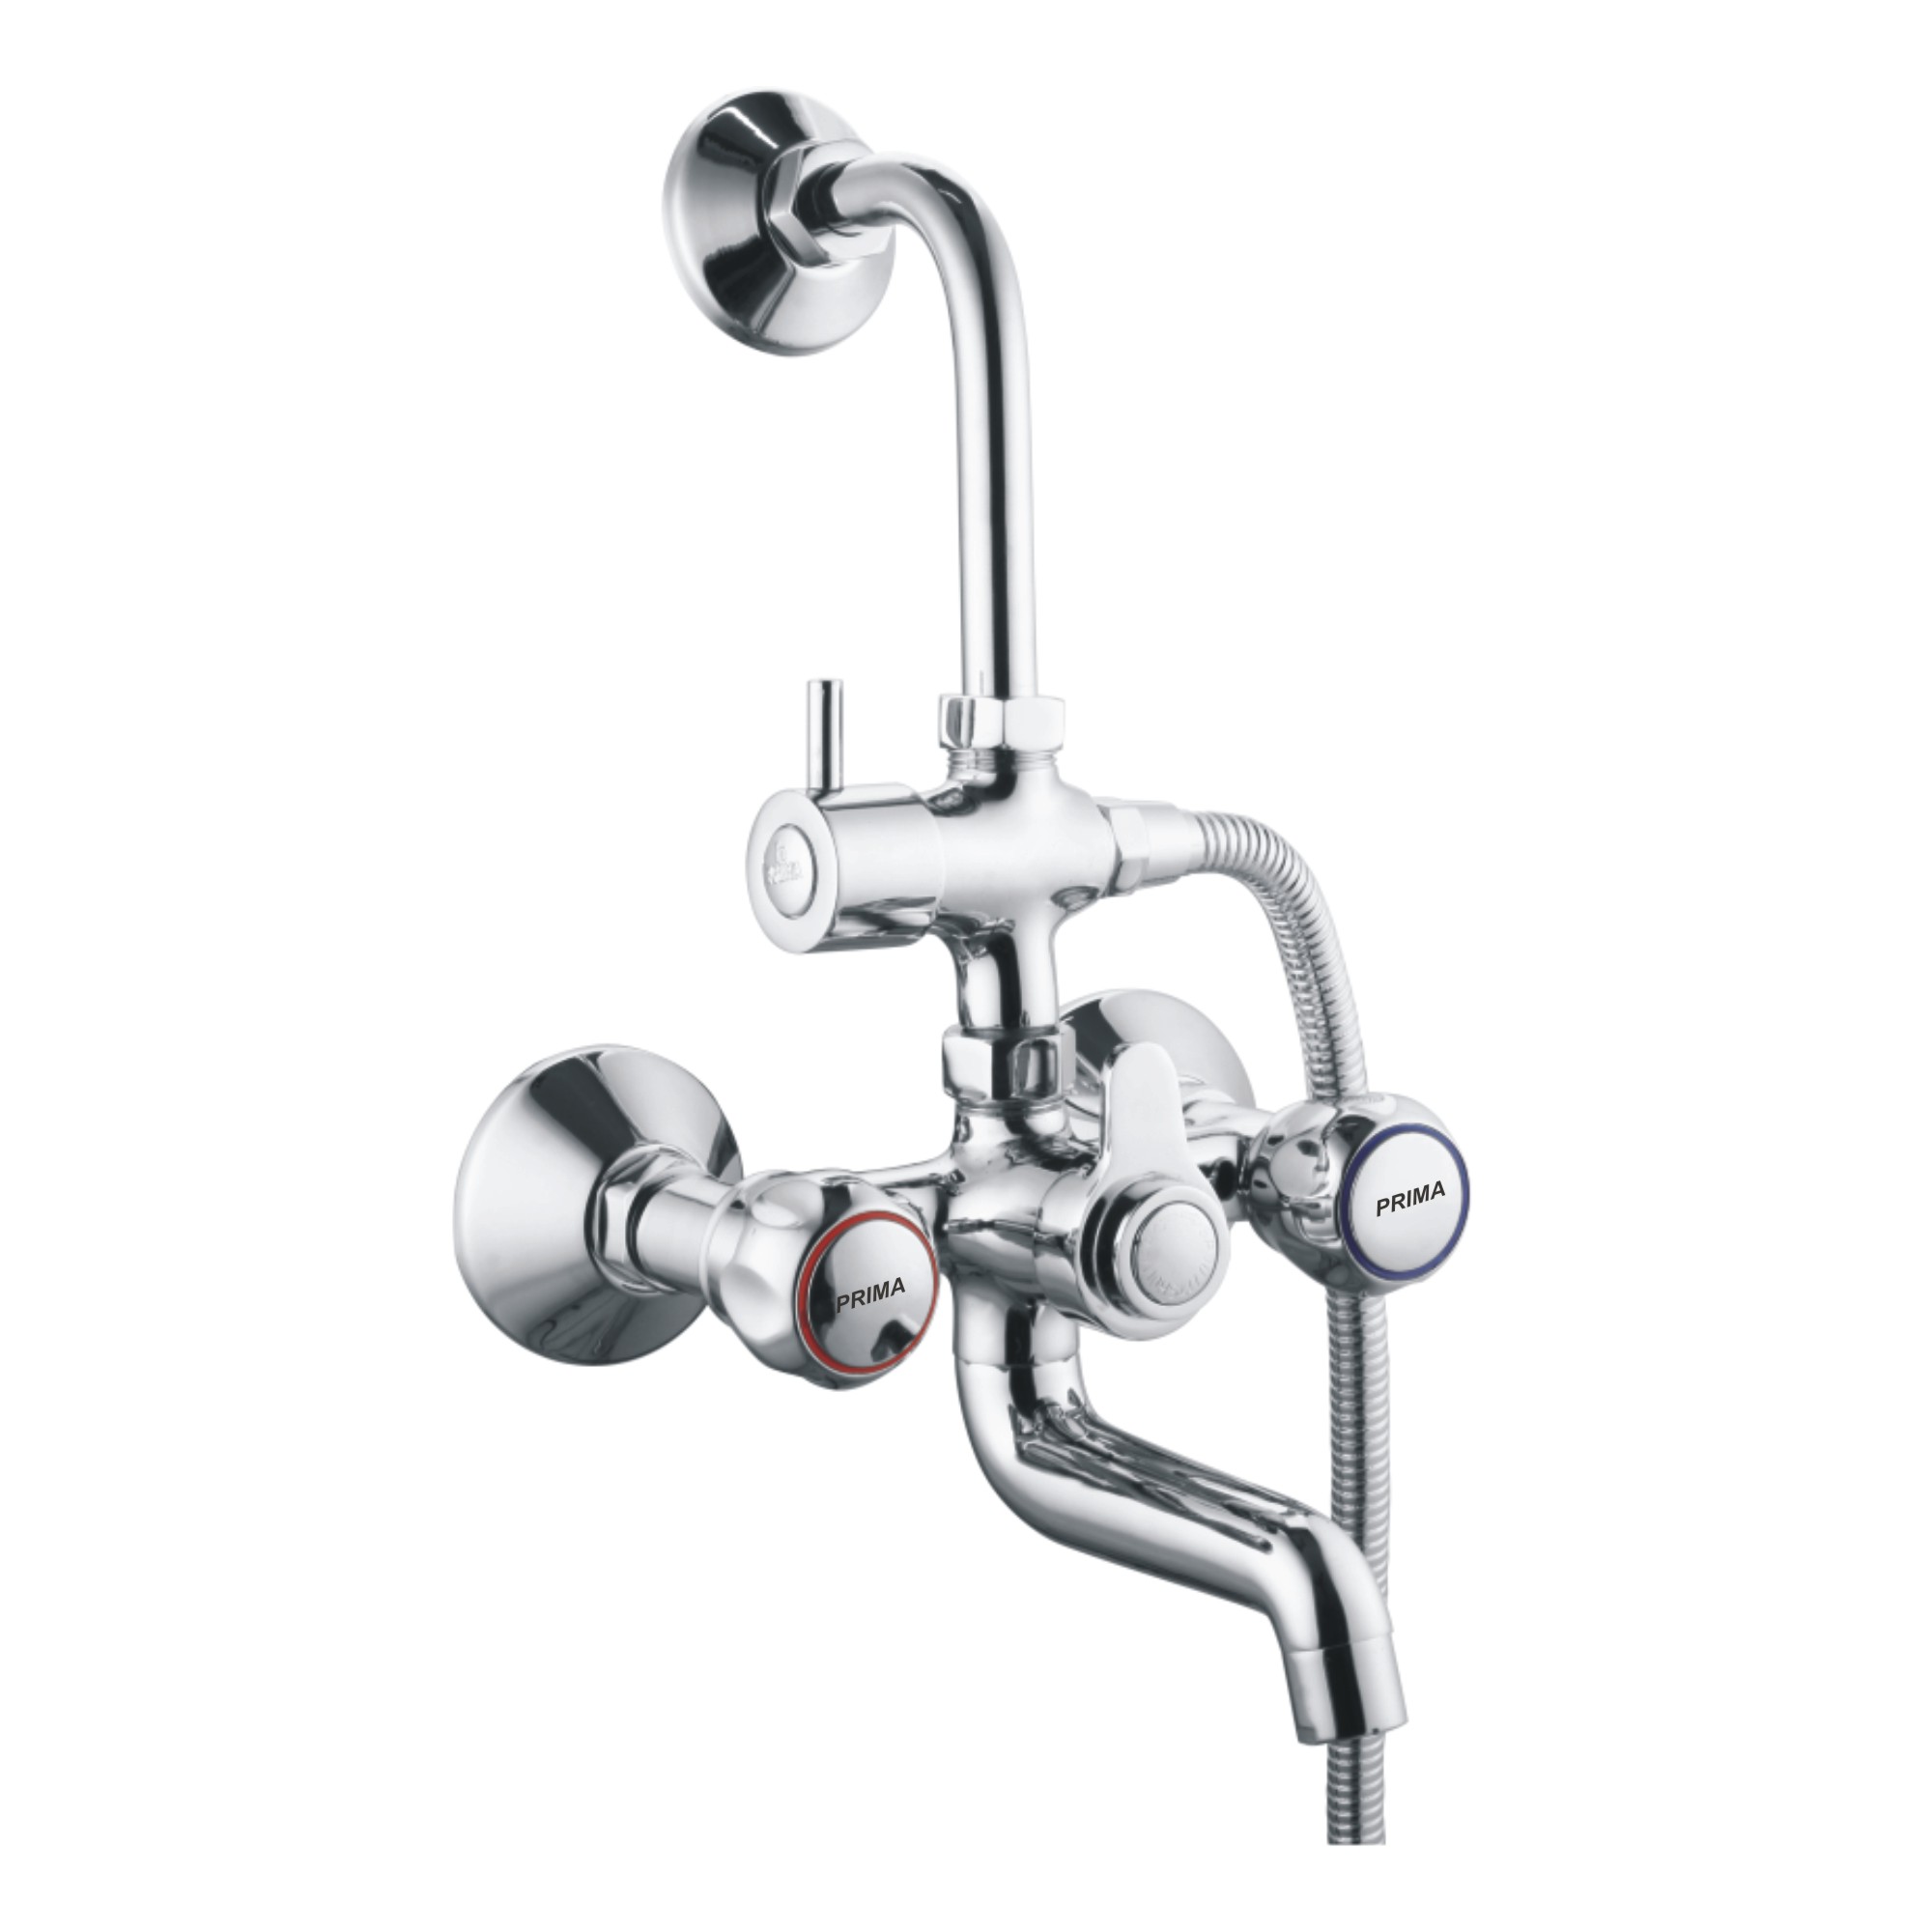 C.P Wall Mixer 3 in 1 With Bend Set Tel shower